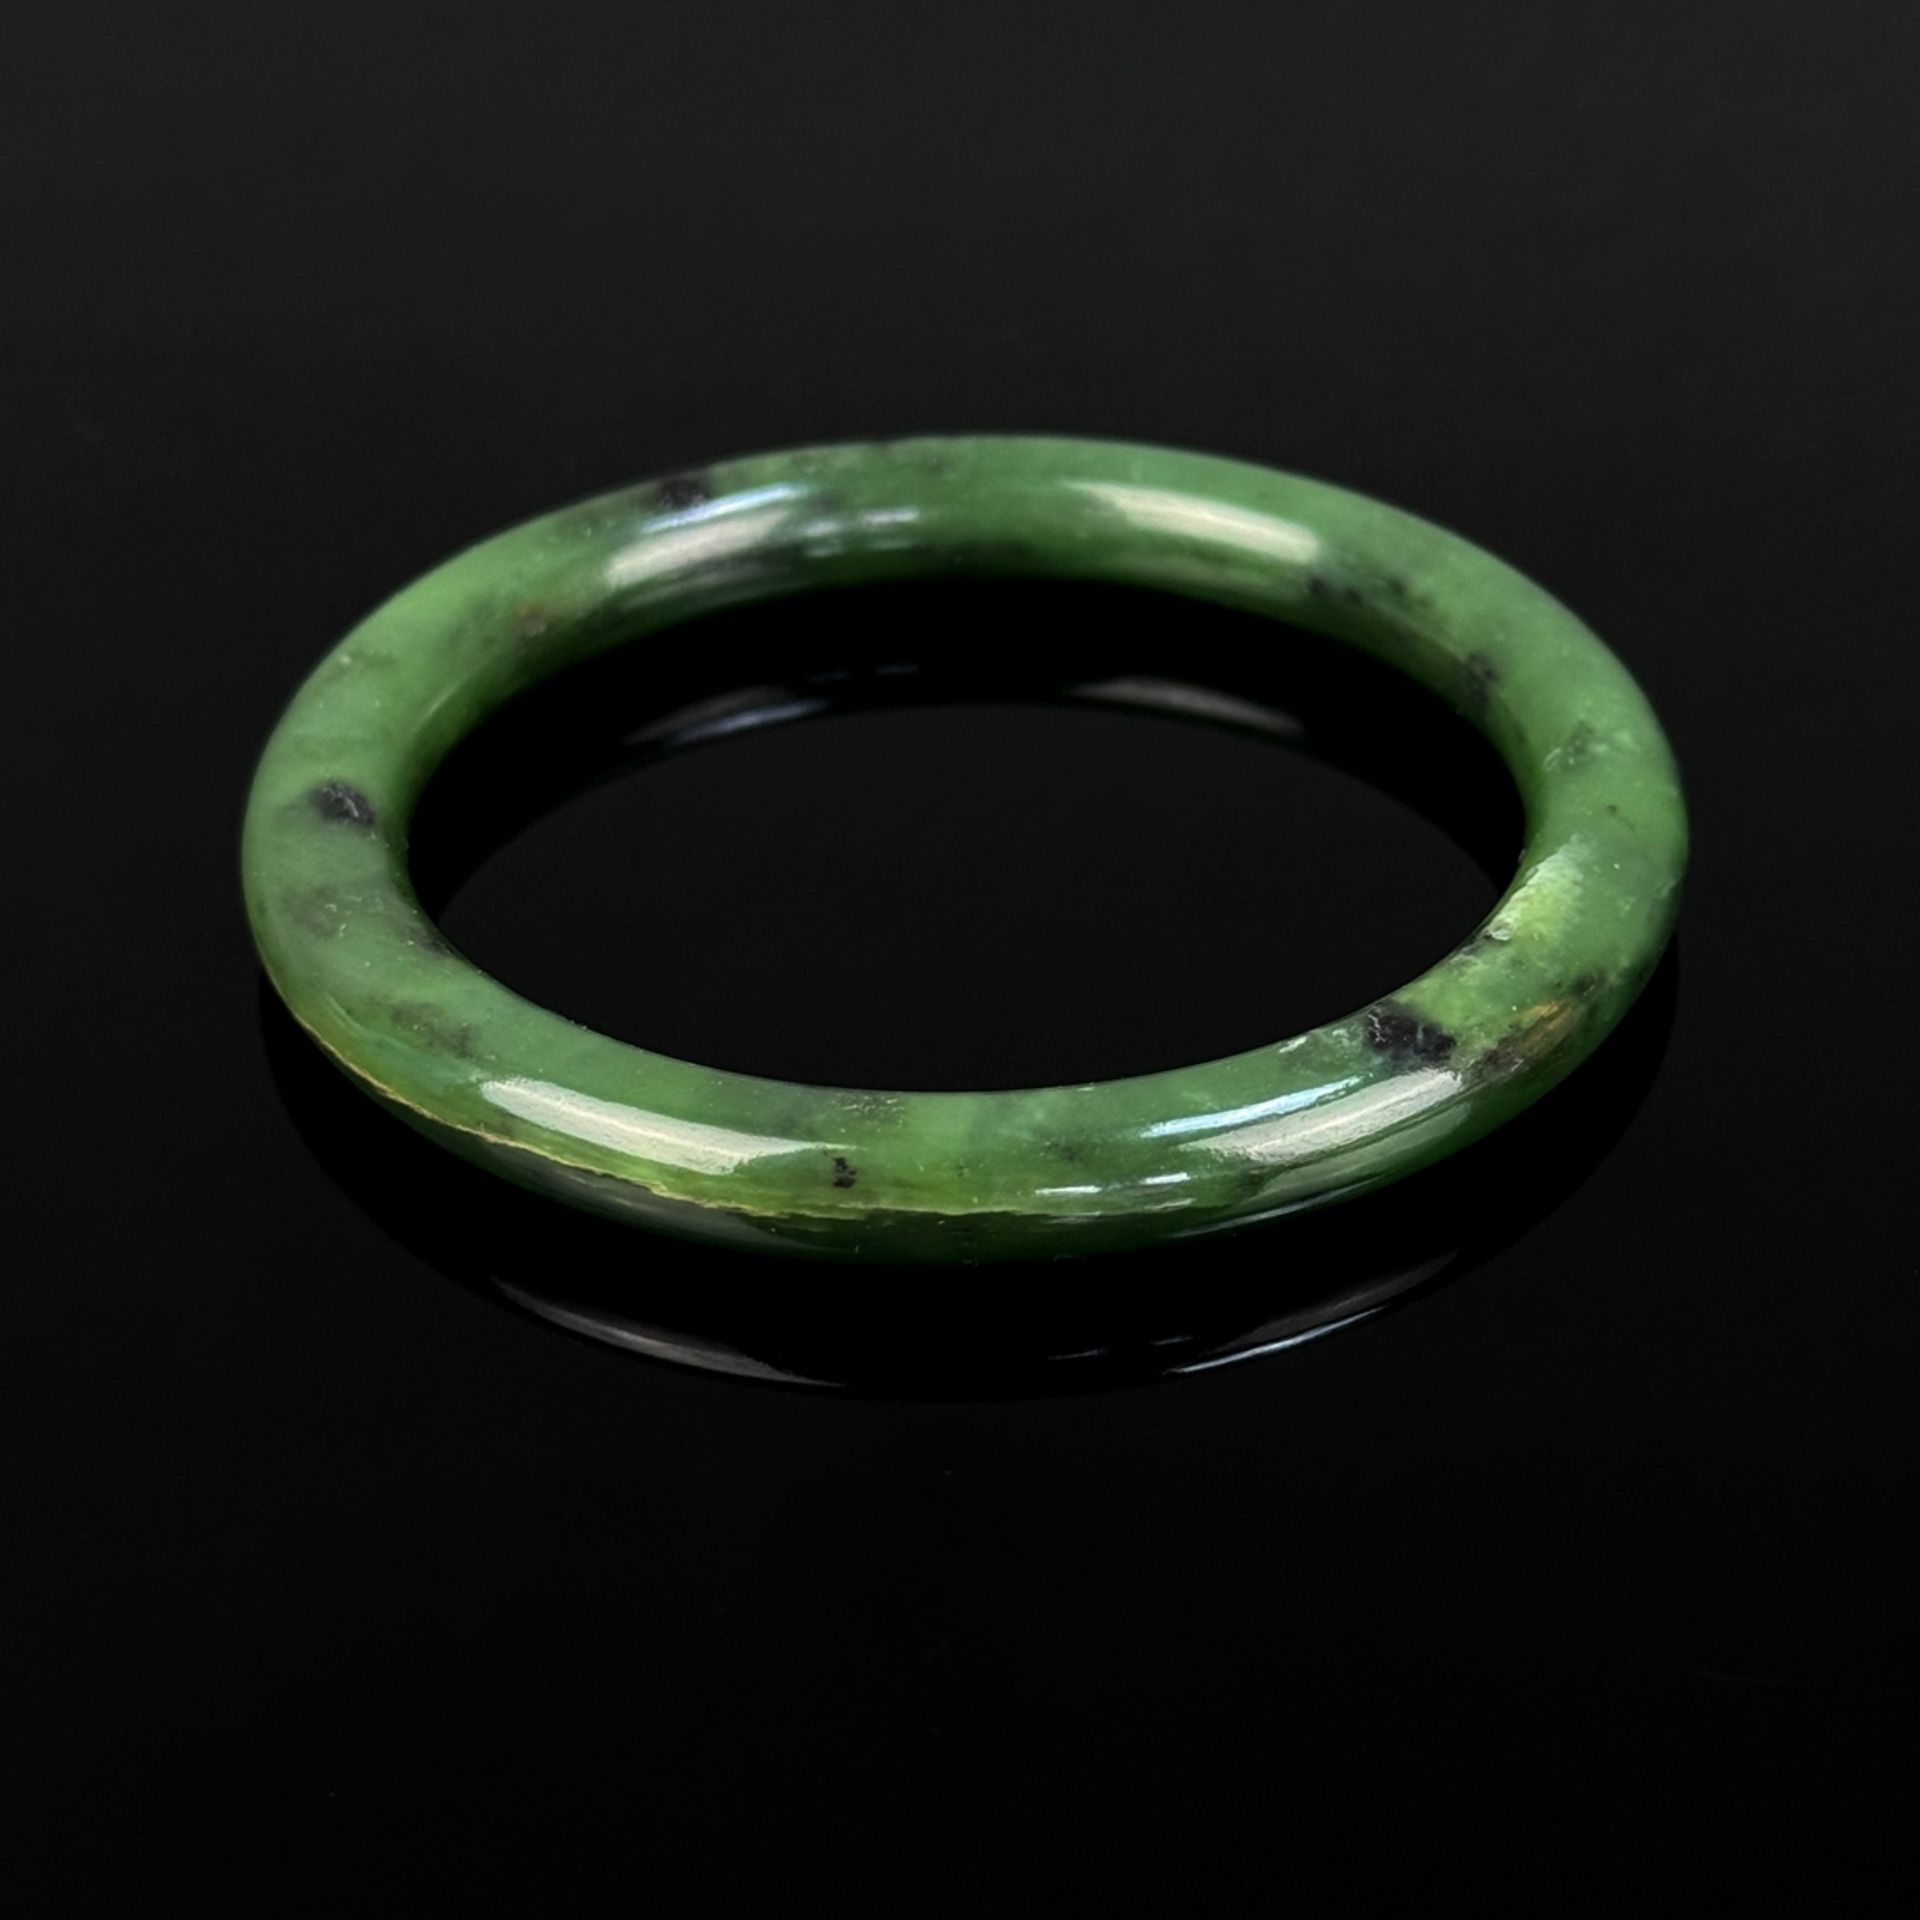 Jade bangle, total weight 41g, hand-cut bangle, solidly crafted from natural forest green jade, inn